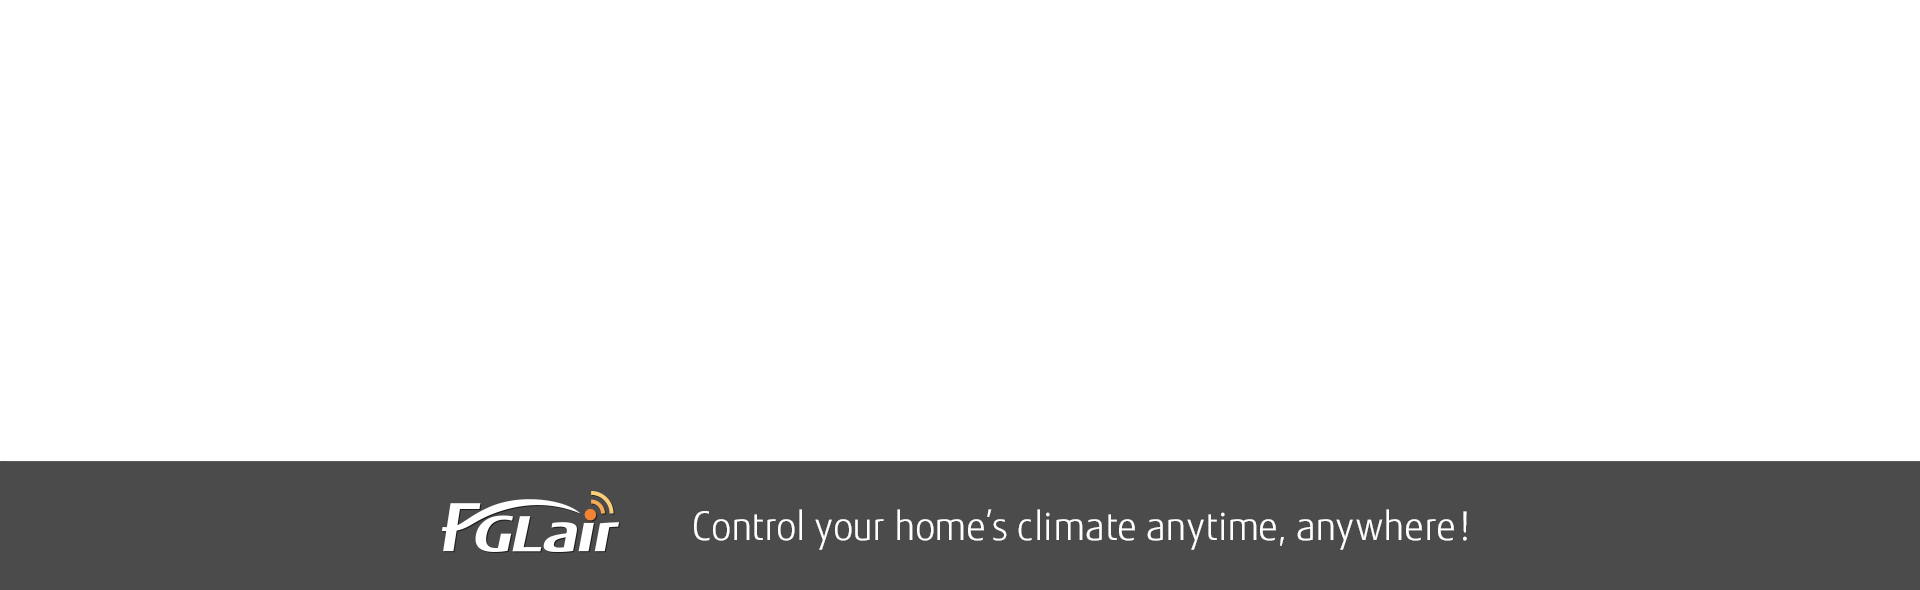 FGLair™ Wireless LAN app: Control your home's climate anytime, anywhere!